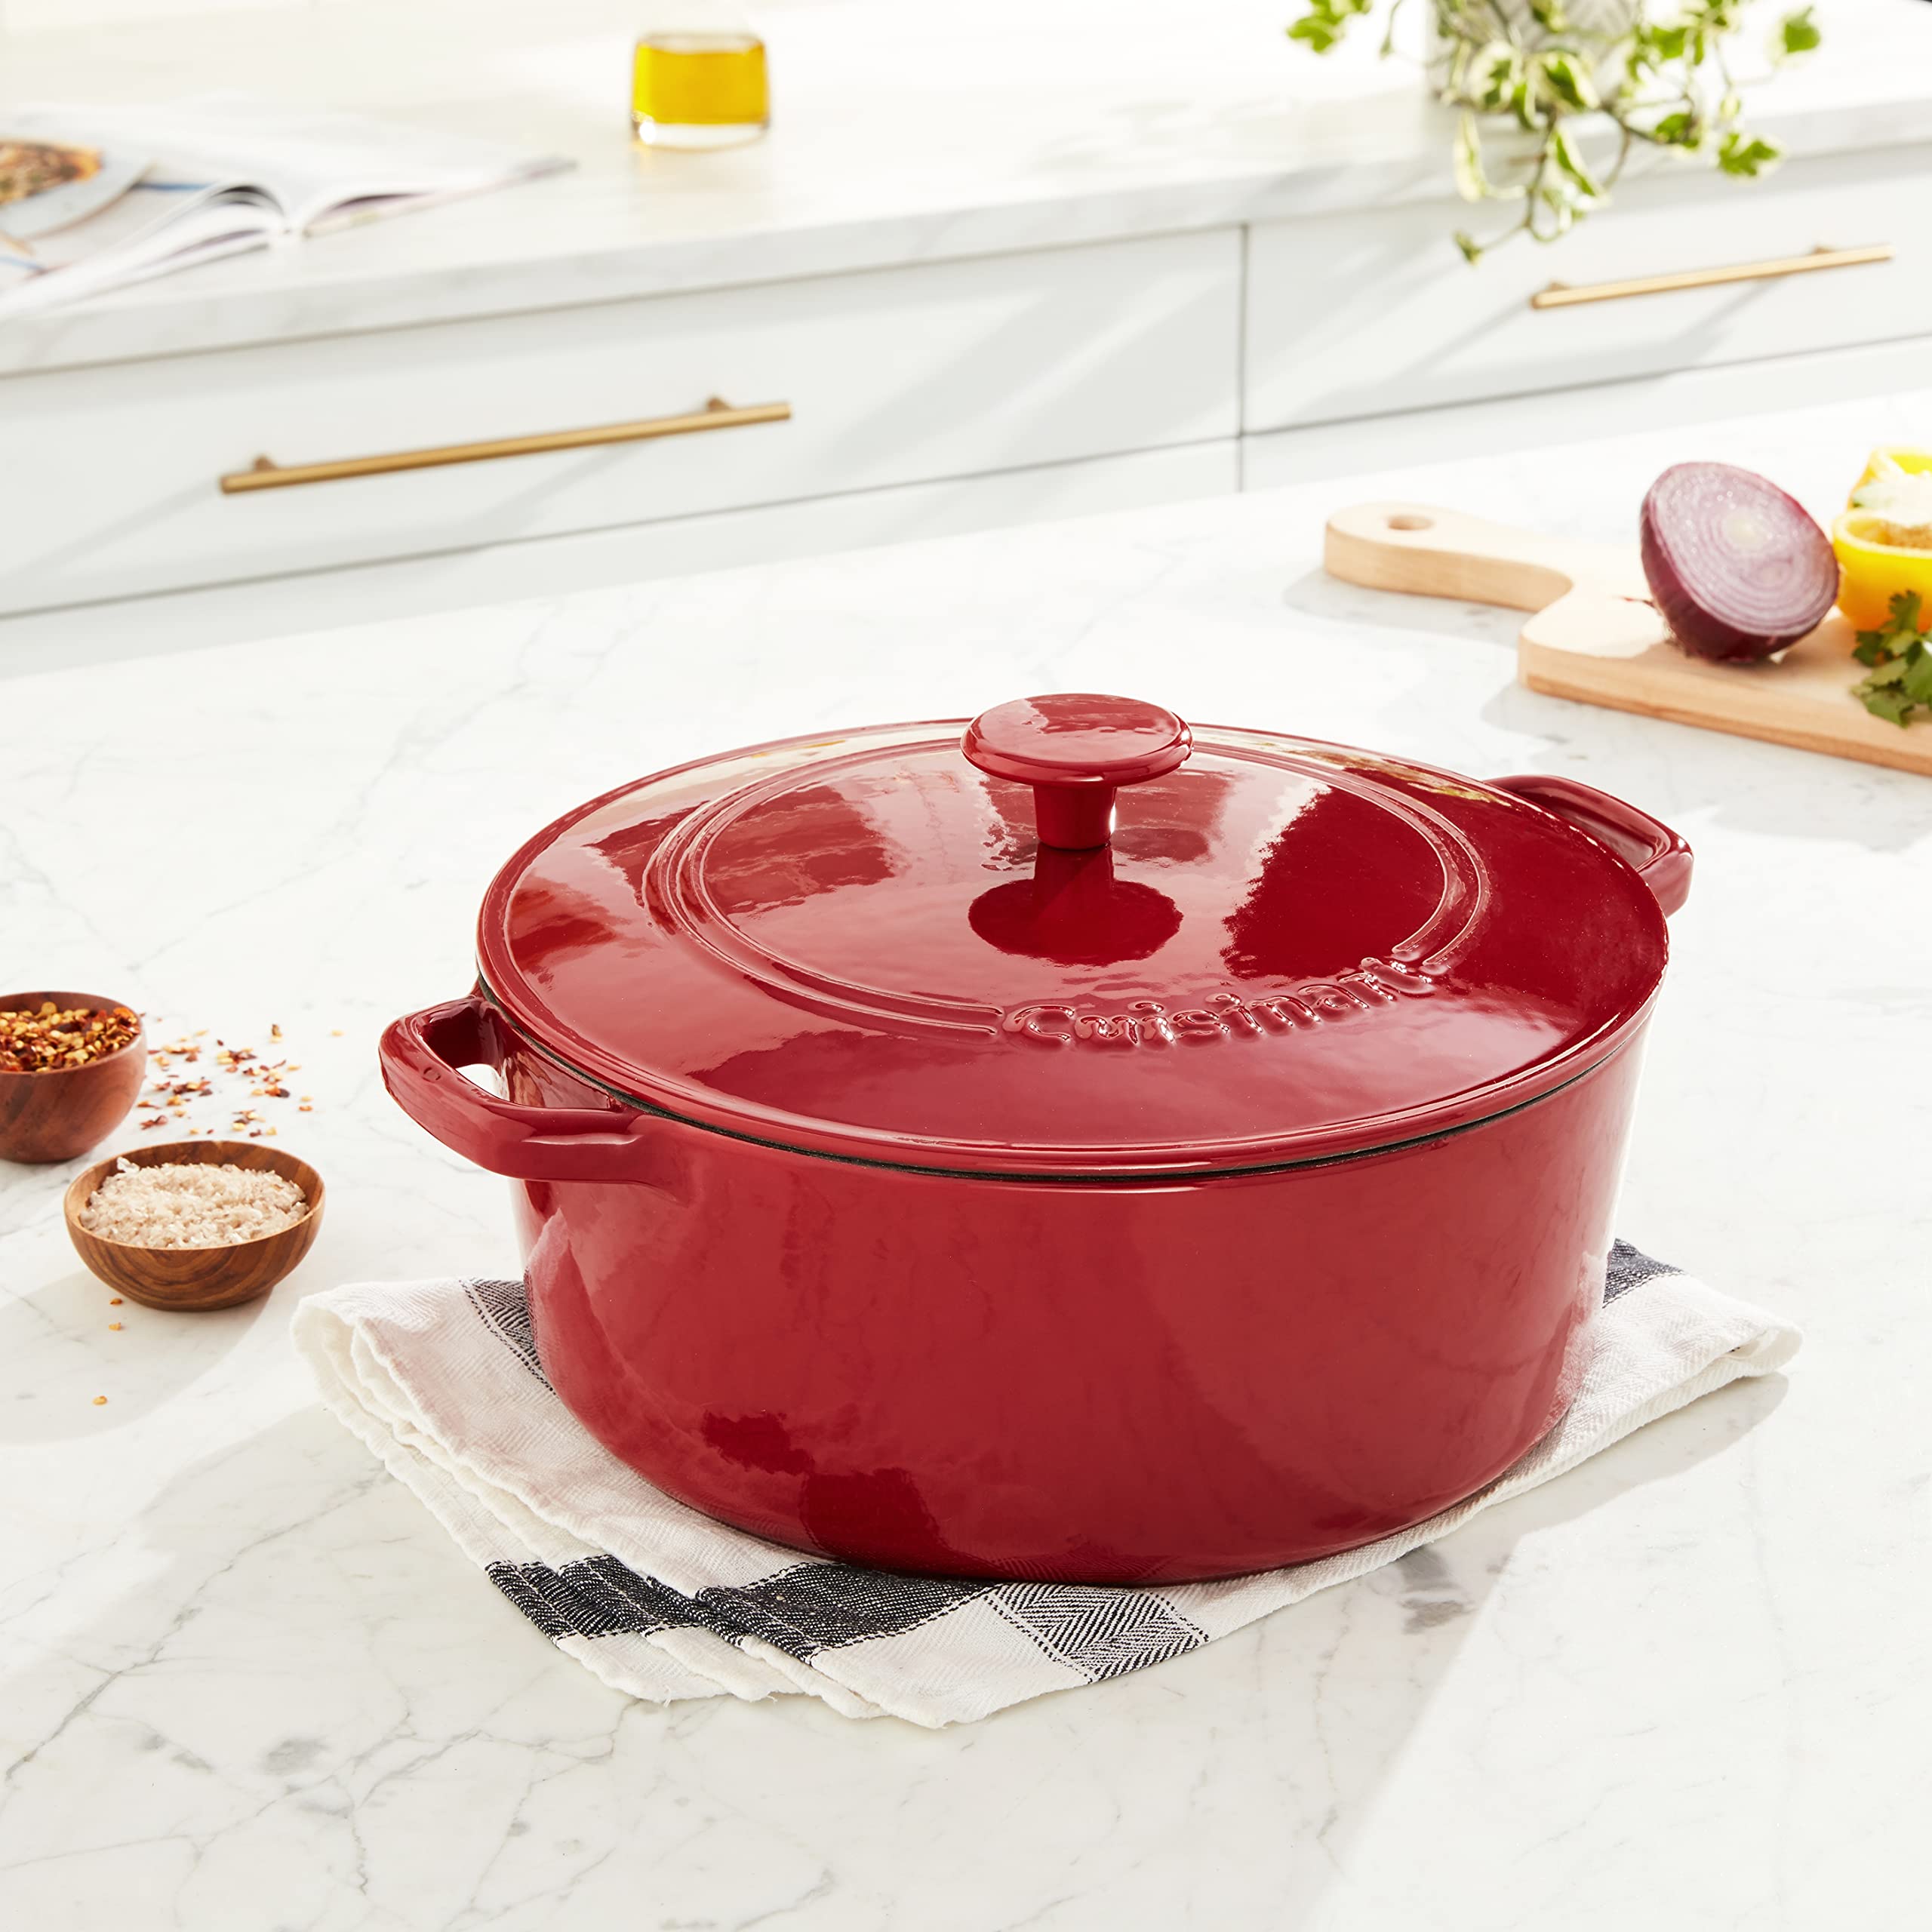 Cuisinart Chef's Classic Enameled Cast Iron 7-Quart Round Covered Casserole, Cardinal Red